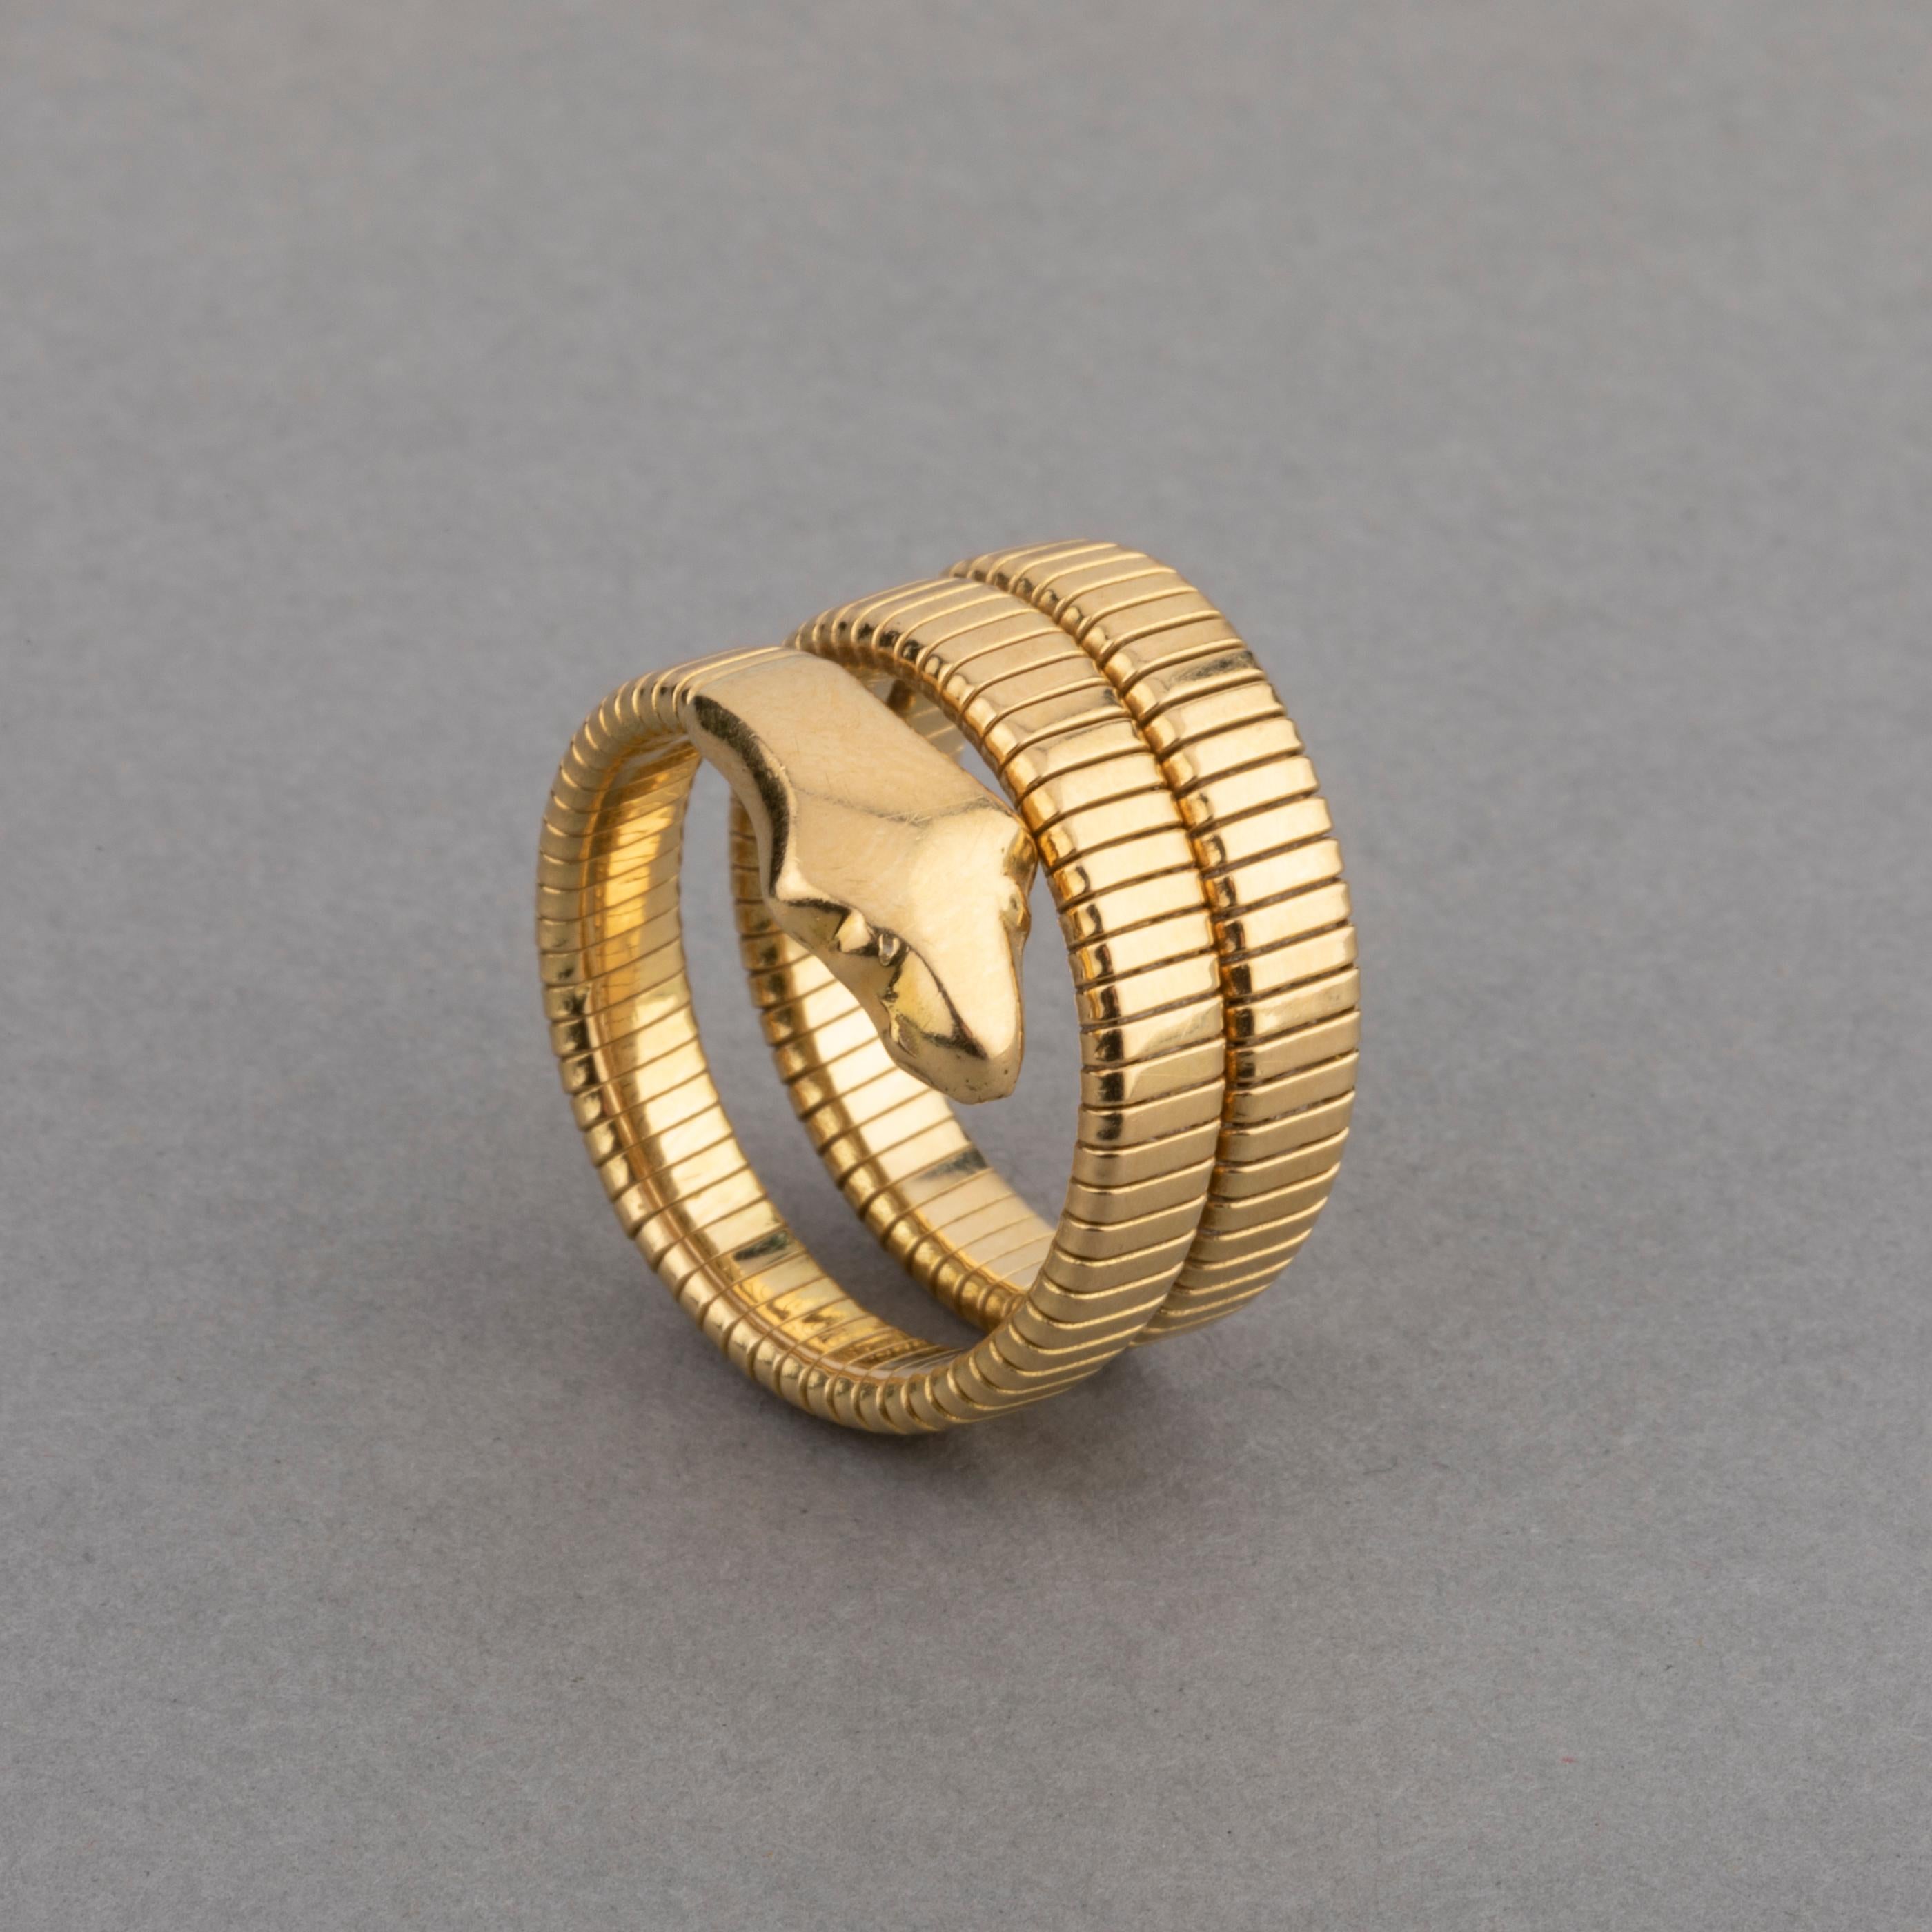 French Vintage Gold Snake Ring

Very lovely snake ring, made in France Circa 1970. 
18k gold, hallmark for gold (the eagle).
Size 51 europe or 5.5 Us, sizeable
Total weight 12.90 grams